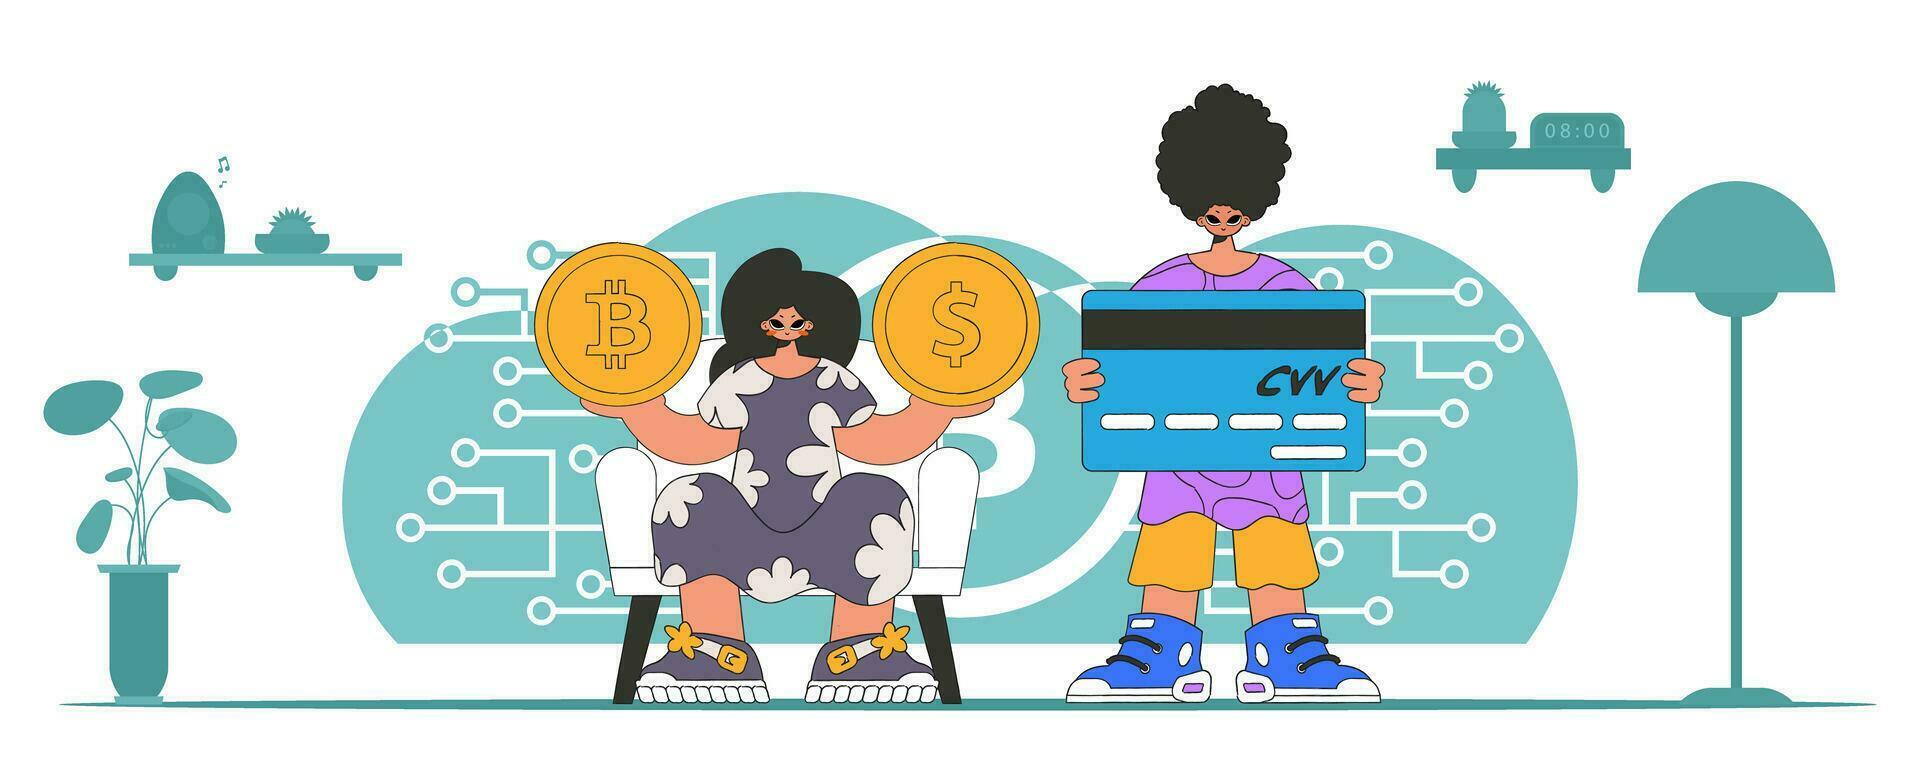 Digital money management theme. a group of people interact with crypto assets. vector